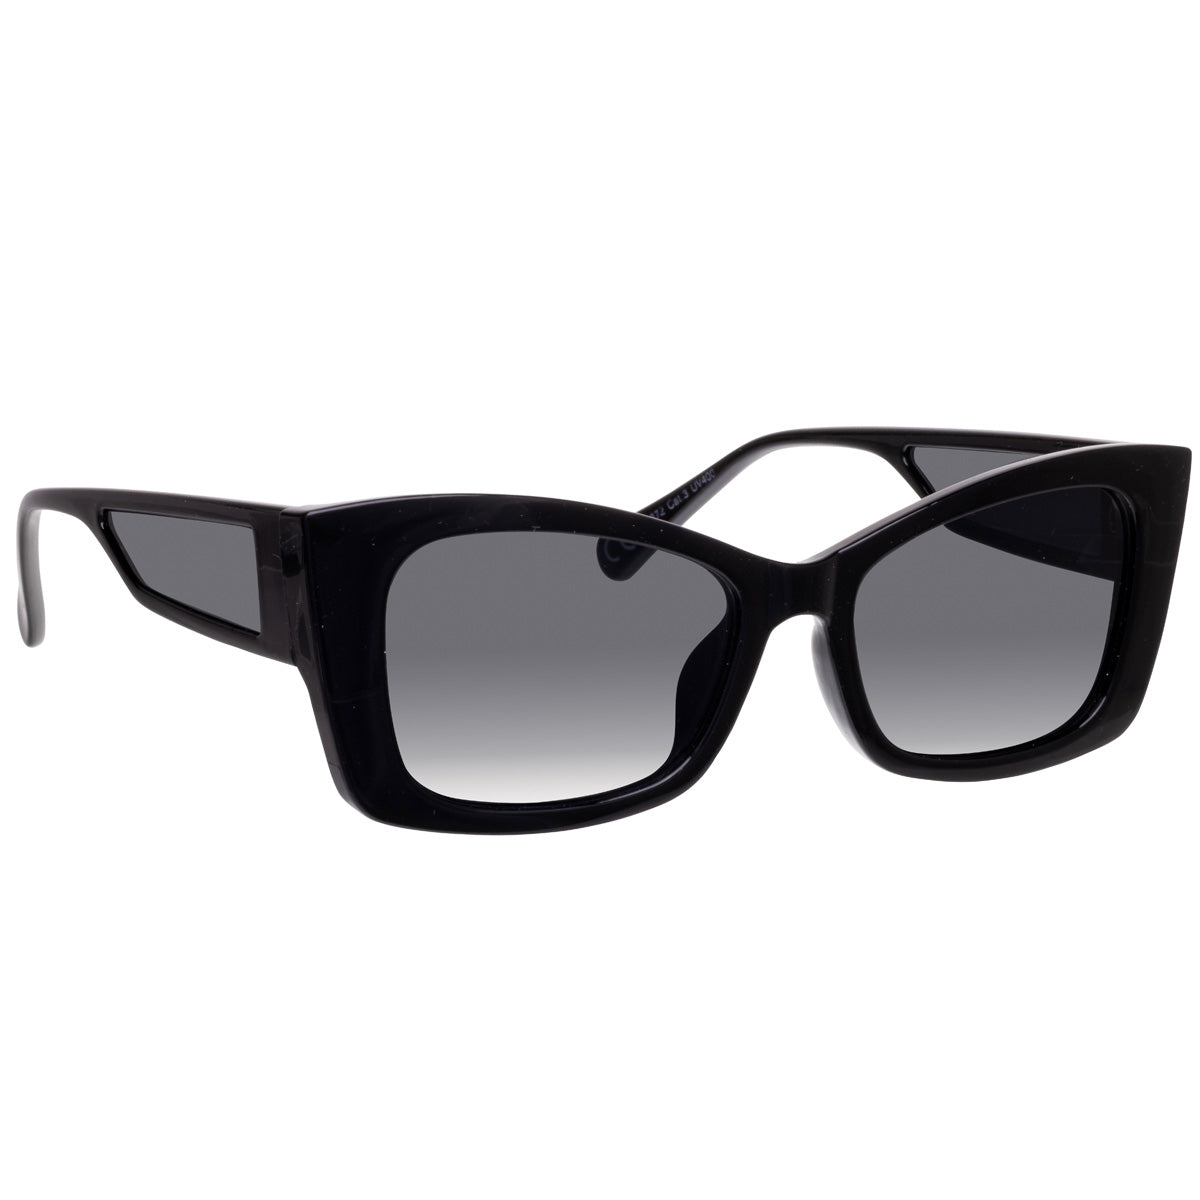 Angled sunglasses with buckled lens